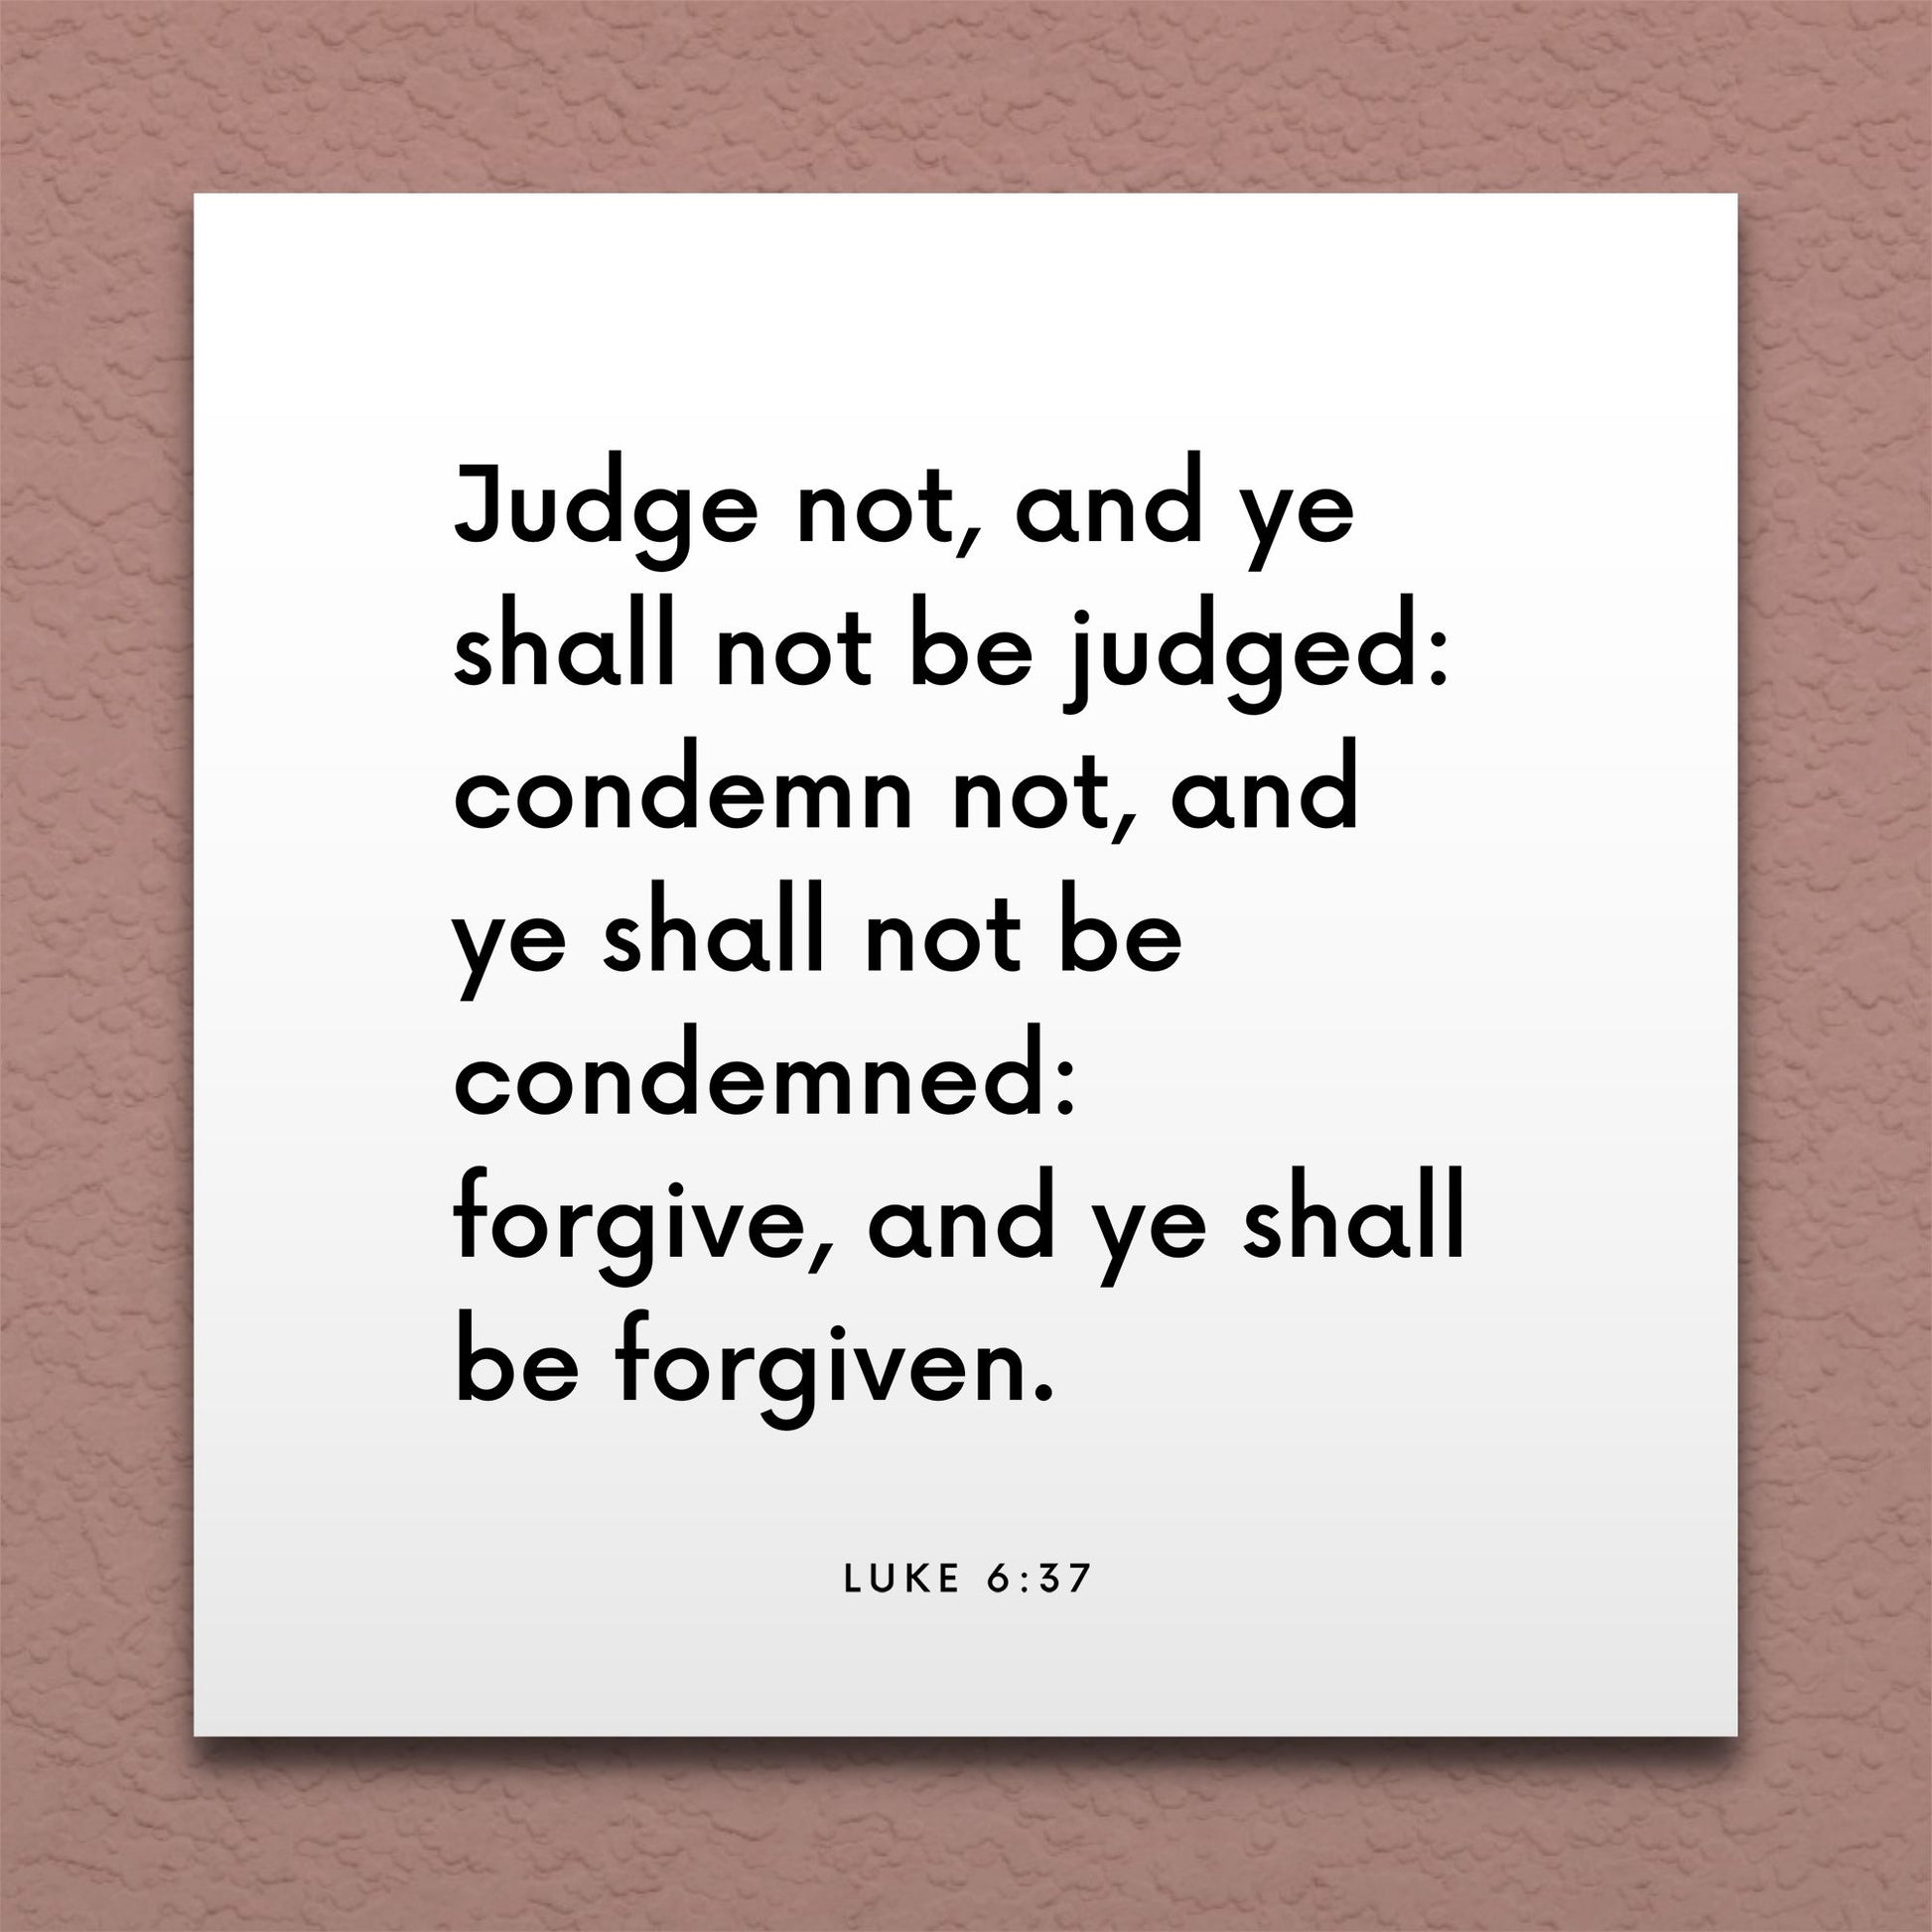 Wall-mounted scripture tile for Luke 6:37 - "Judge not, and ye shall not be judged"